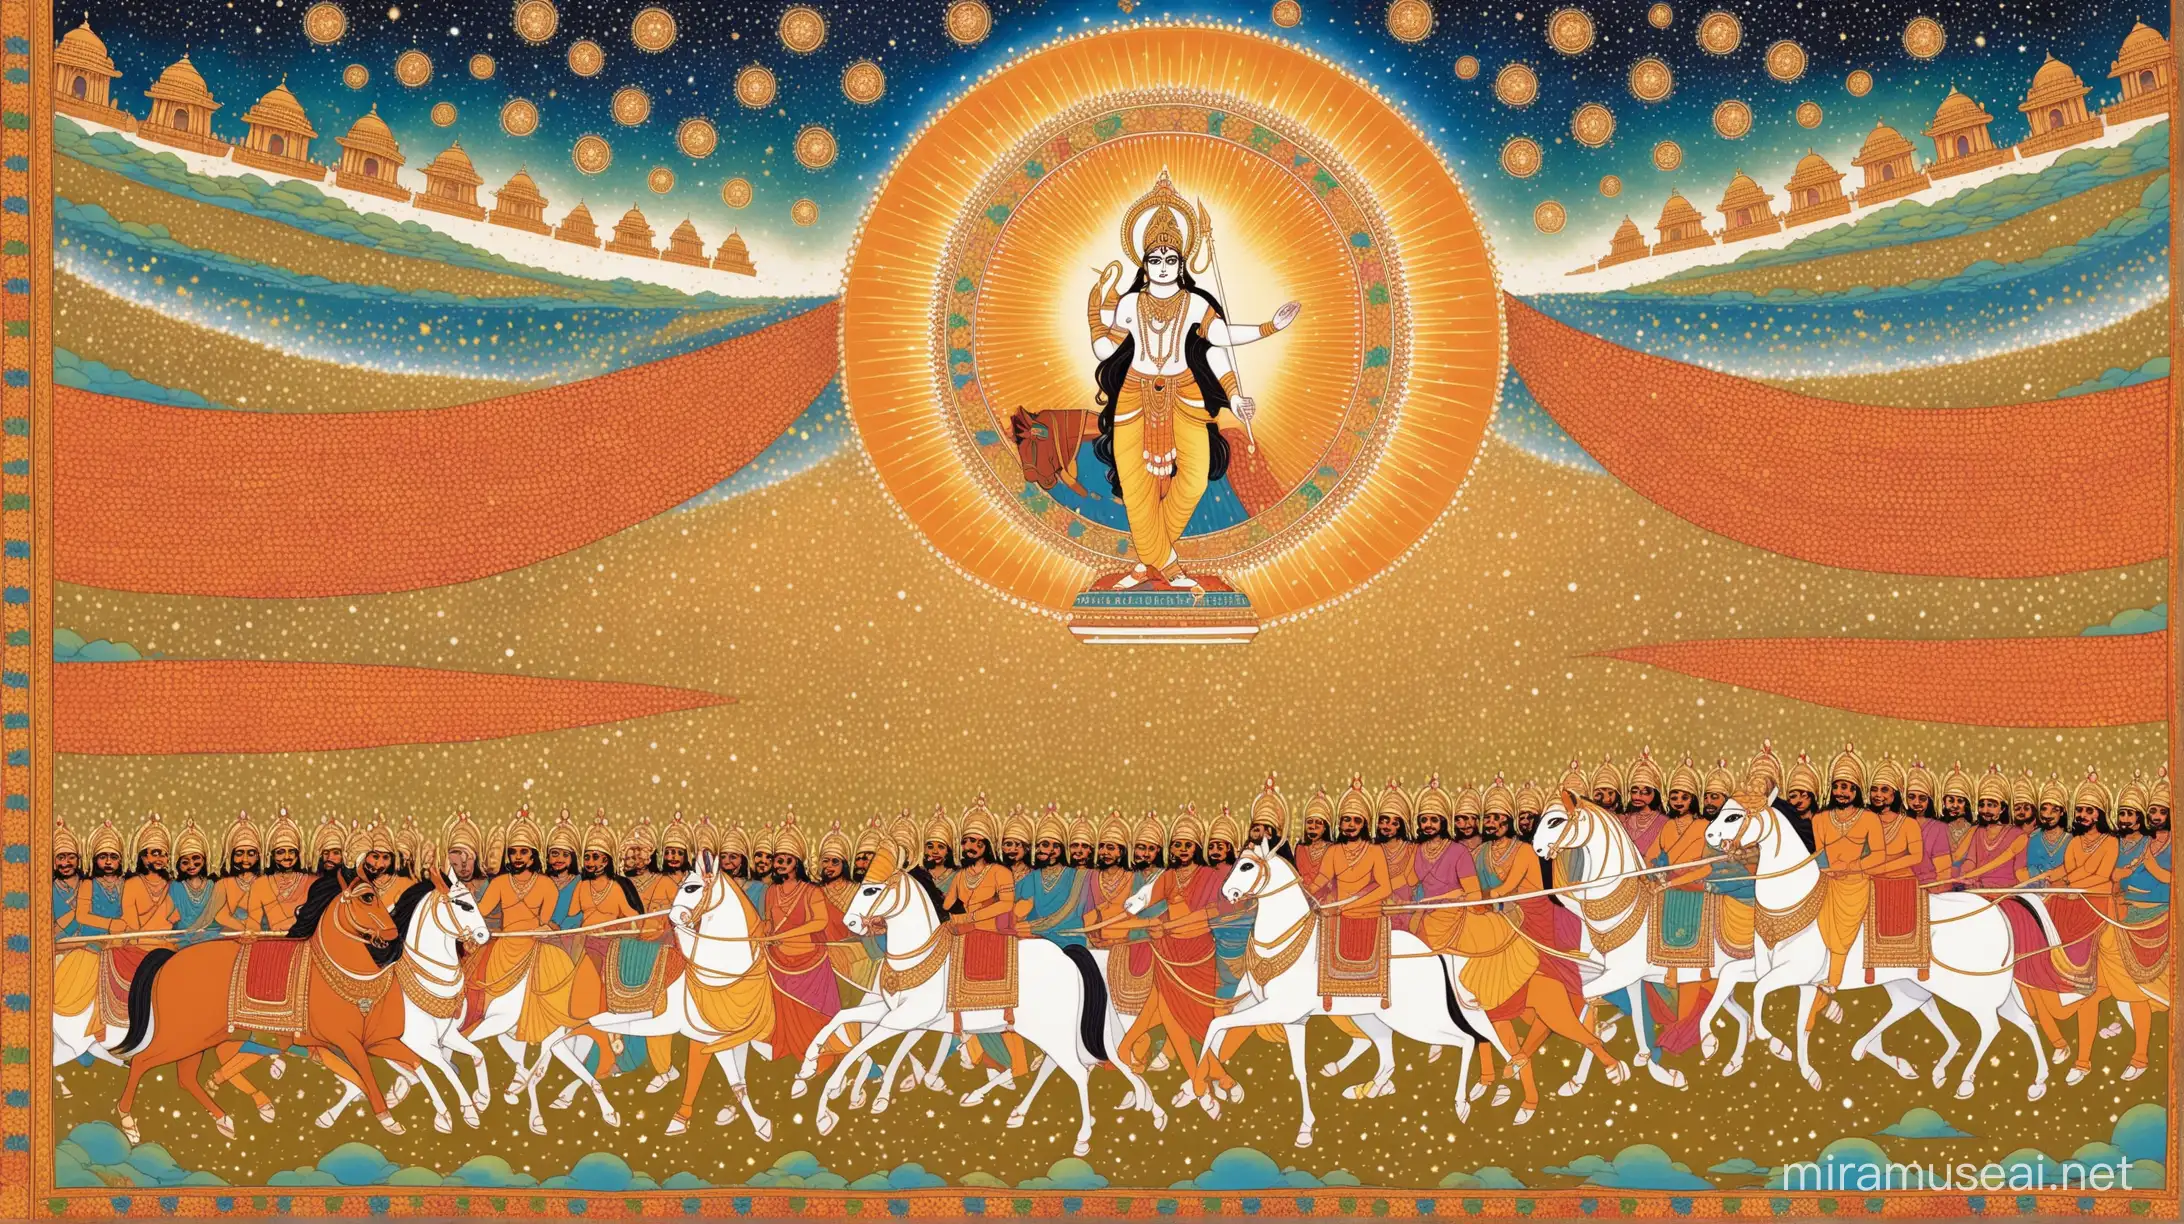 Amidst the chaos of Kurukshetra's battlefield, Lord Krishna imparts the profound teachings of the Bhagavad Gita to Arjuna. With celestial beings as witnesses, Krishna's divine counsel guides Arjuna towards spiritual enlightenment, weaving a tapestry of cosmic wisdom amidst the clash of armies.